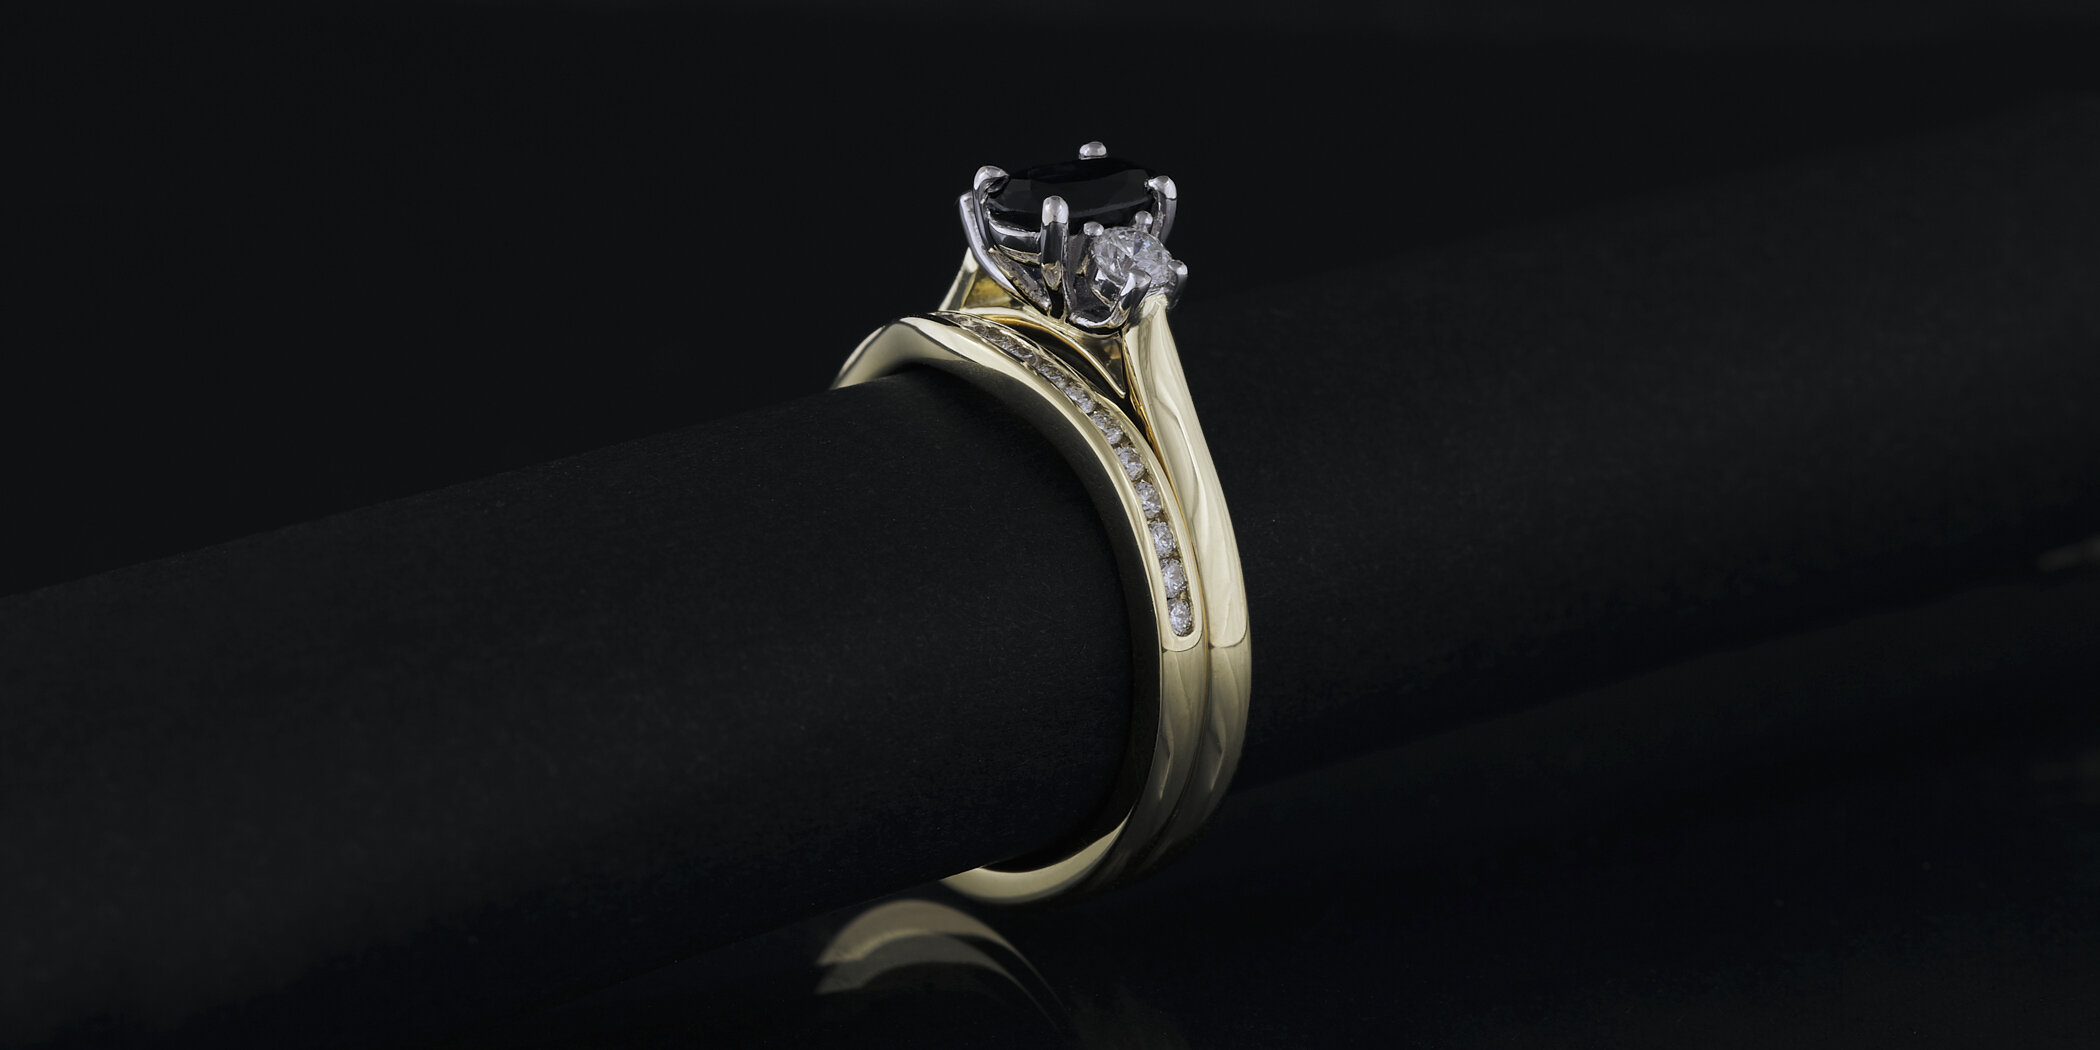  The remade engagement ring with adjustments to allow the wedding ring to sit better. 